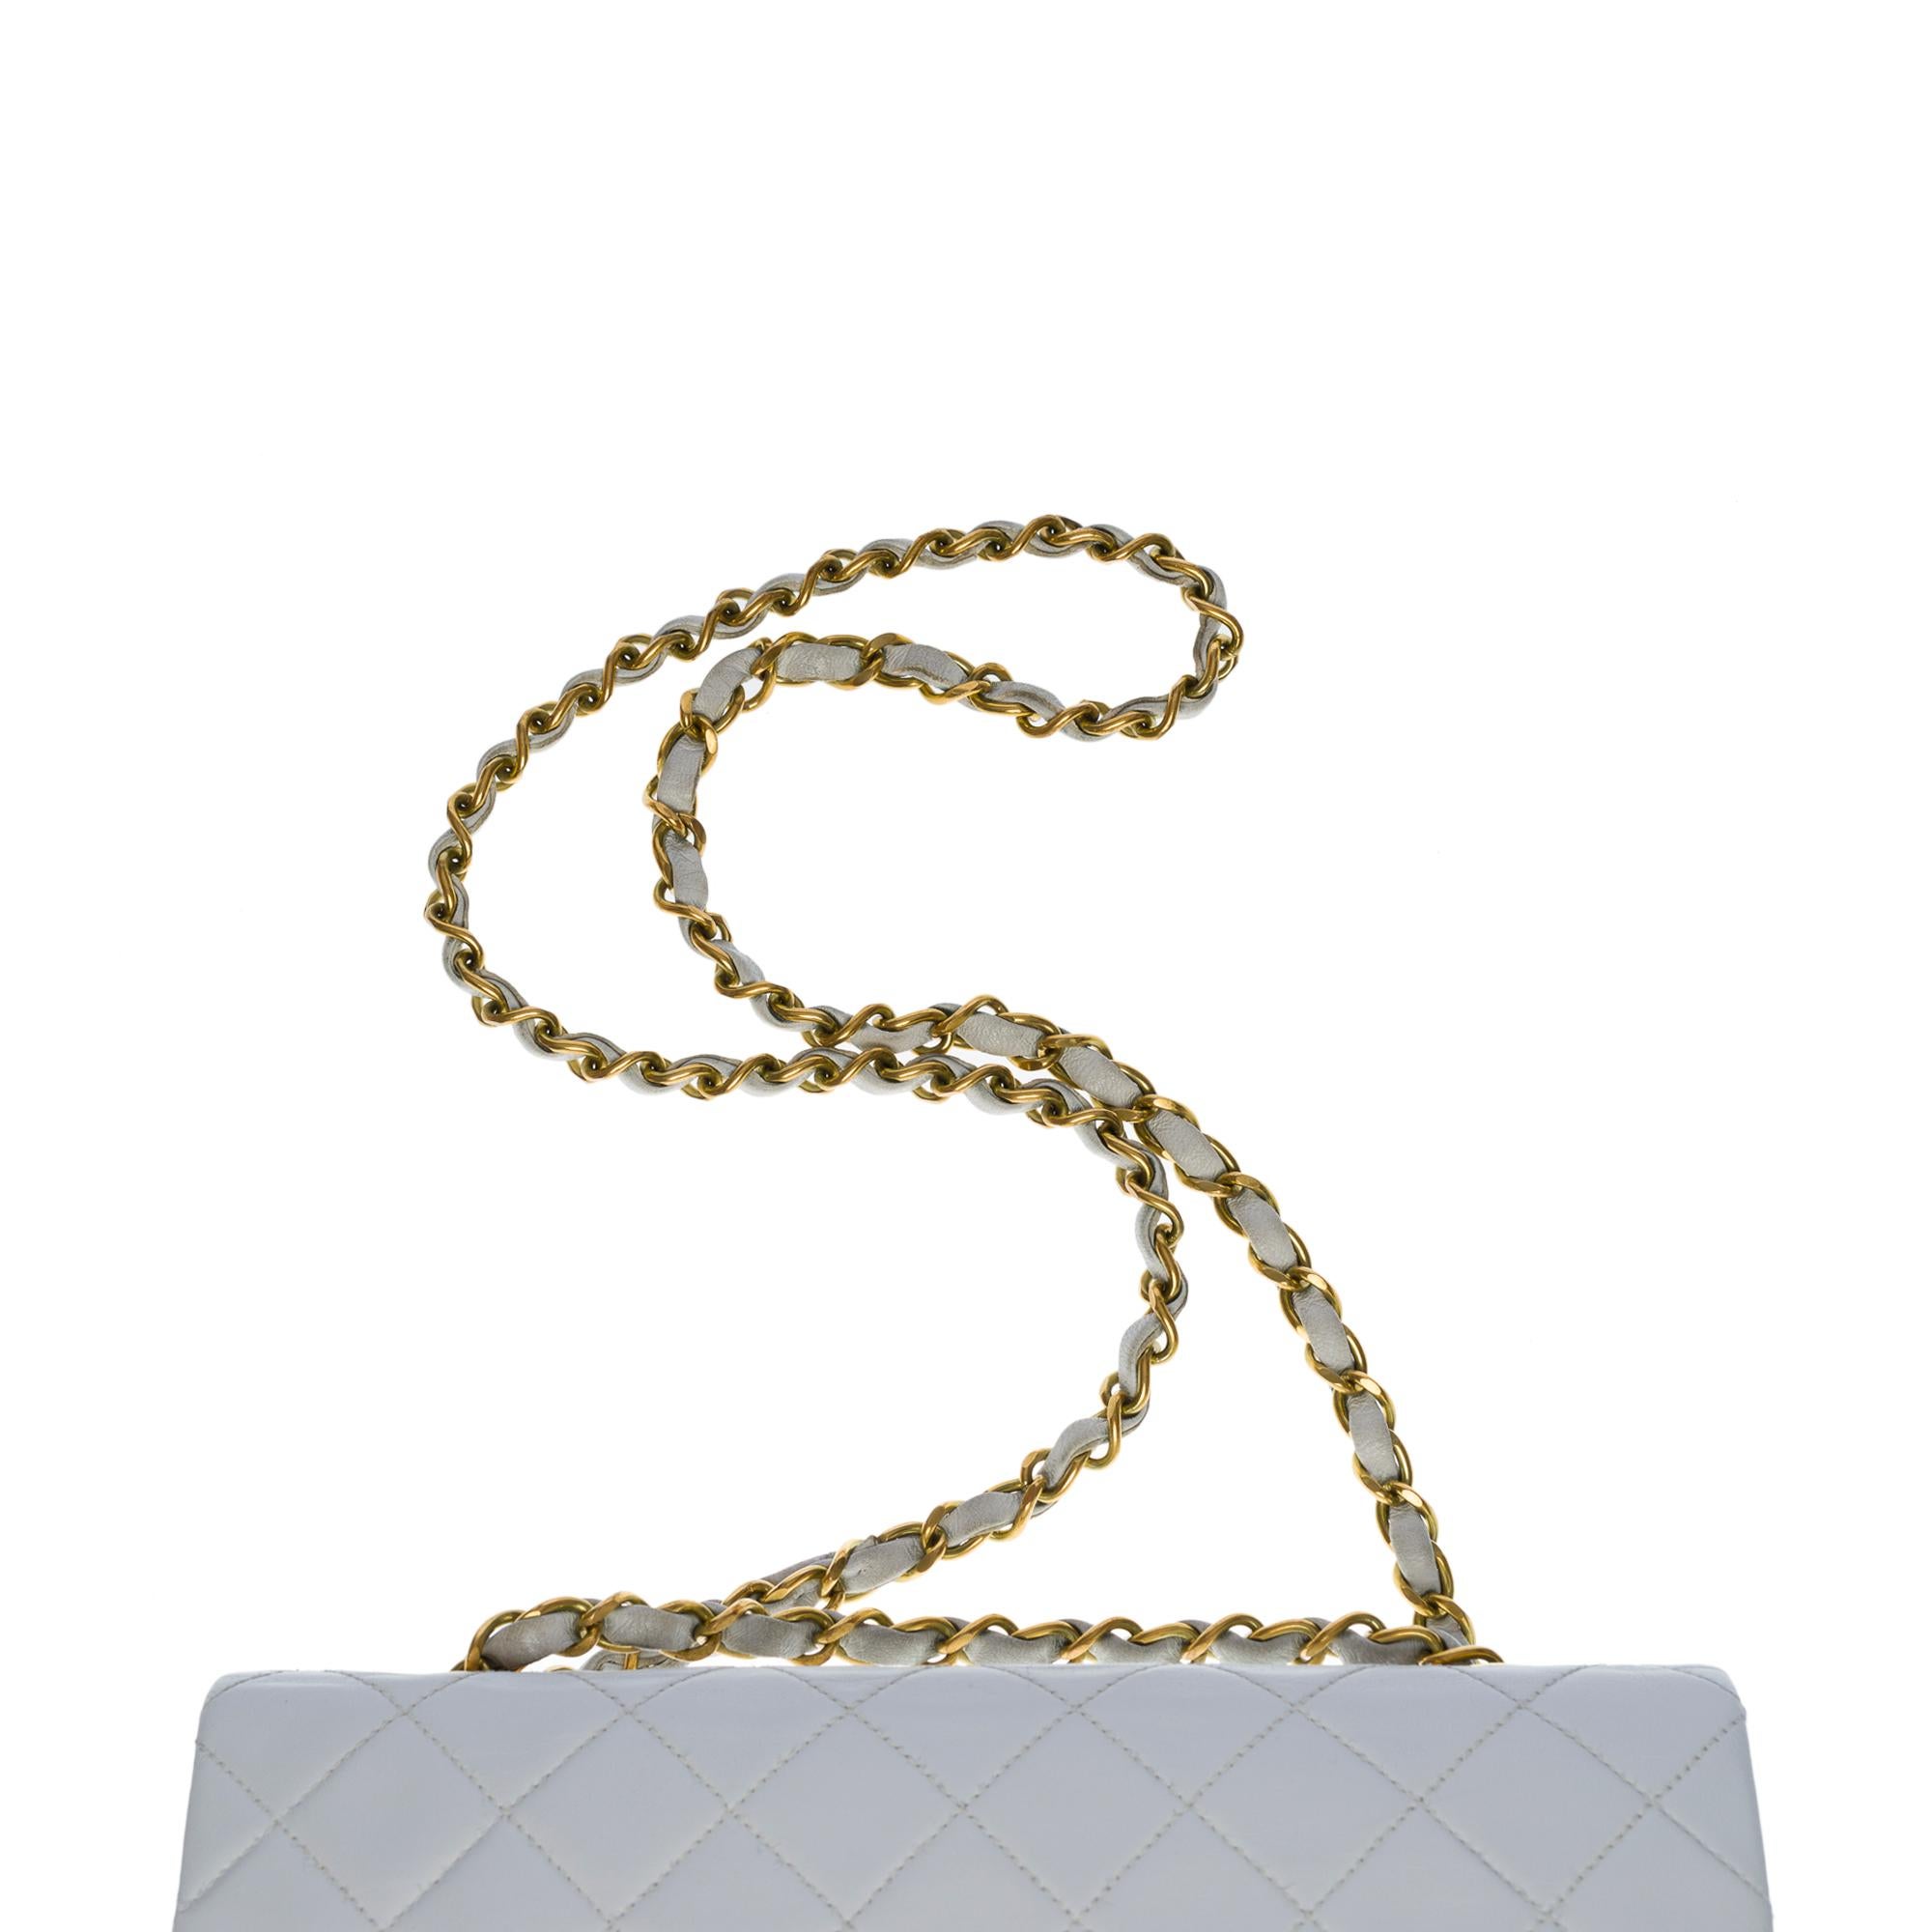 Chanel Timeless 23cm double flap Shoulder bag in White quilted lambskin, GHW 4